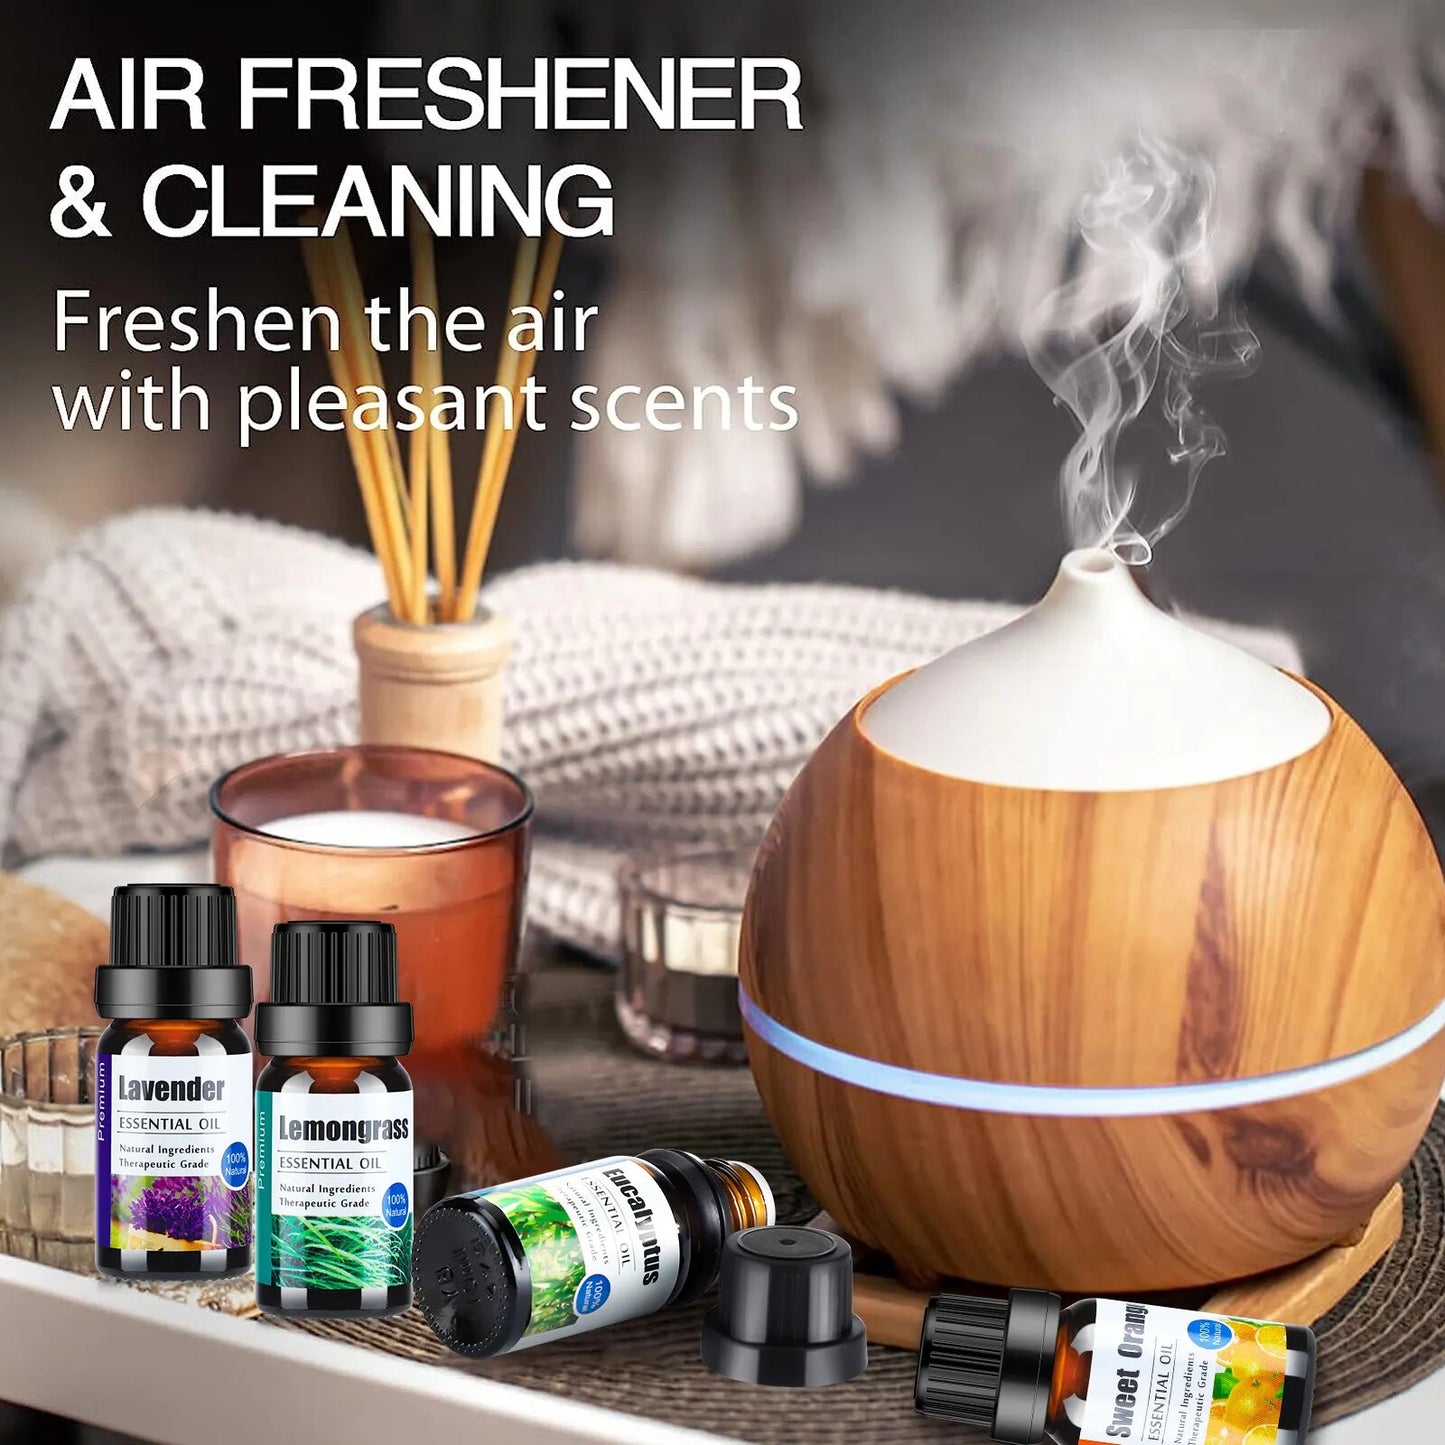 "Premium 6-Piece Gift Set: Pure Essential Oils with Natural Plant Aromas - Lavender, Eucalyptus, Sweet Orange, and Tea Tree Oil - Ideal for Diffusers"